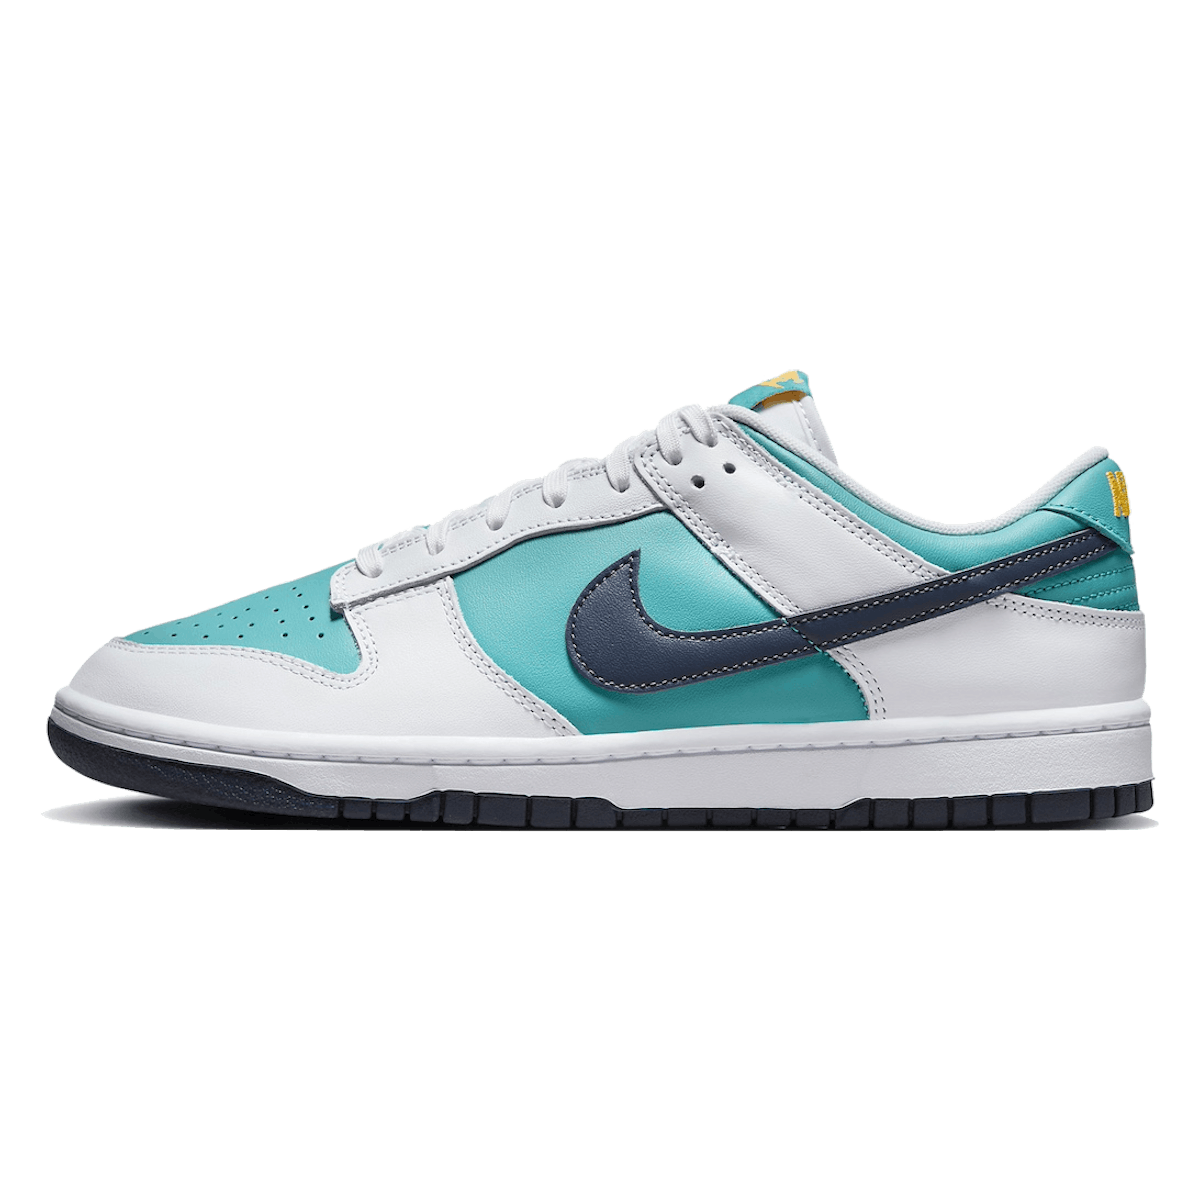 Nike Dunk Low "Dusty Cactus"